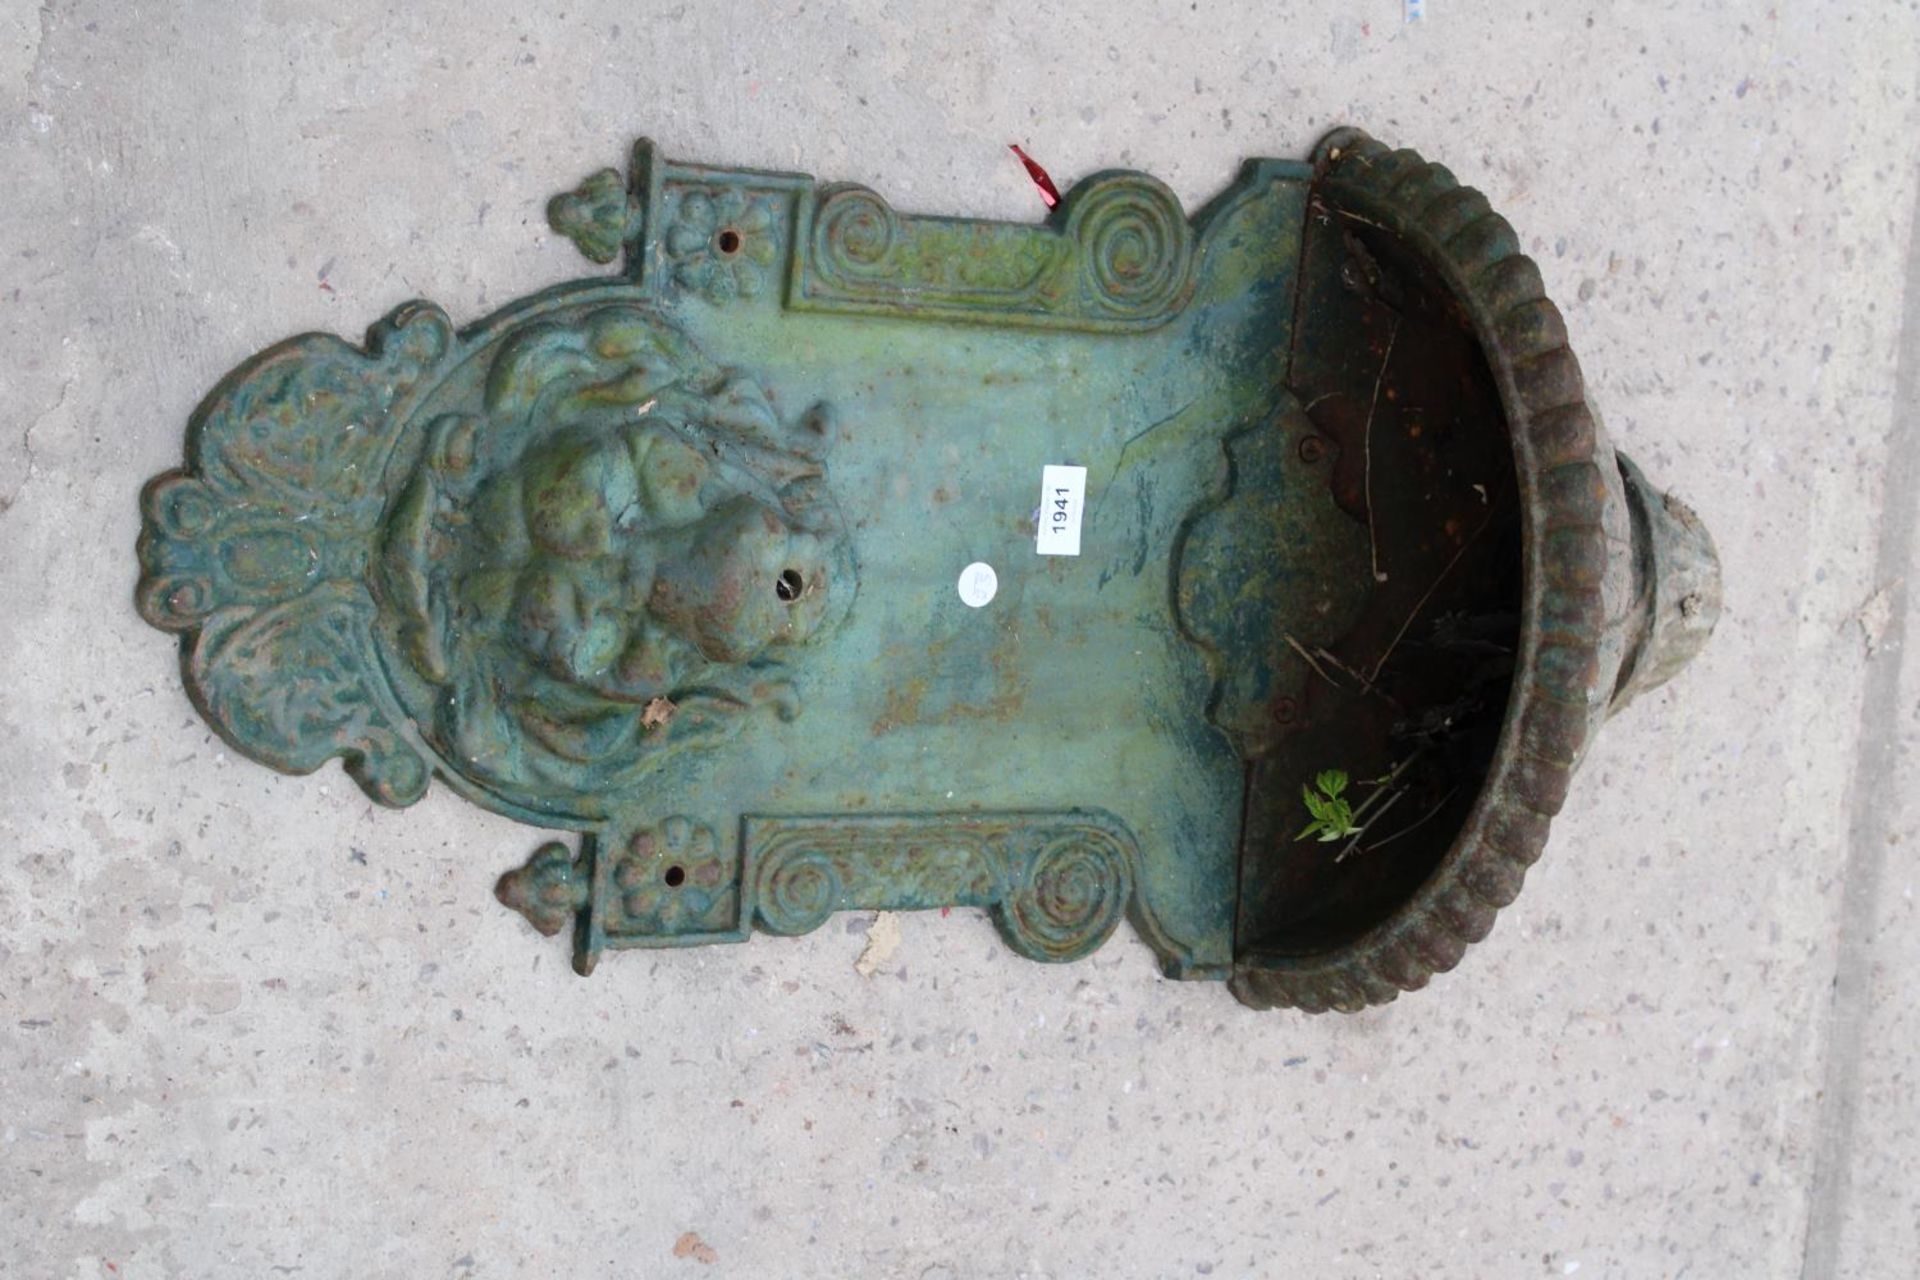 A WALL MOUNTED CAST IRON WATER FEATURE - Image 2 of 2